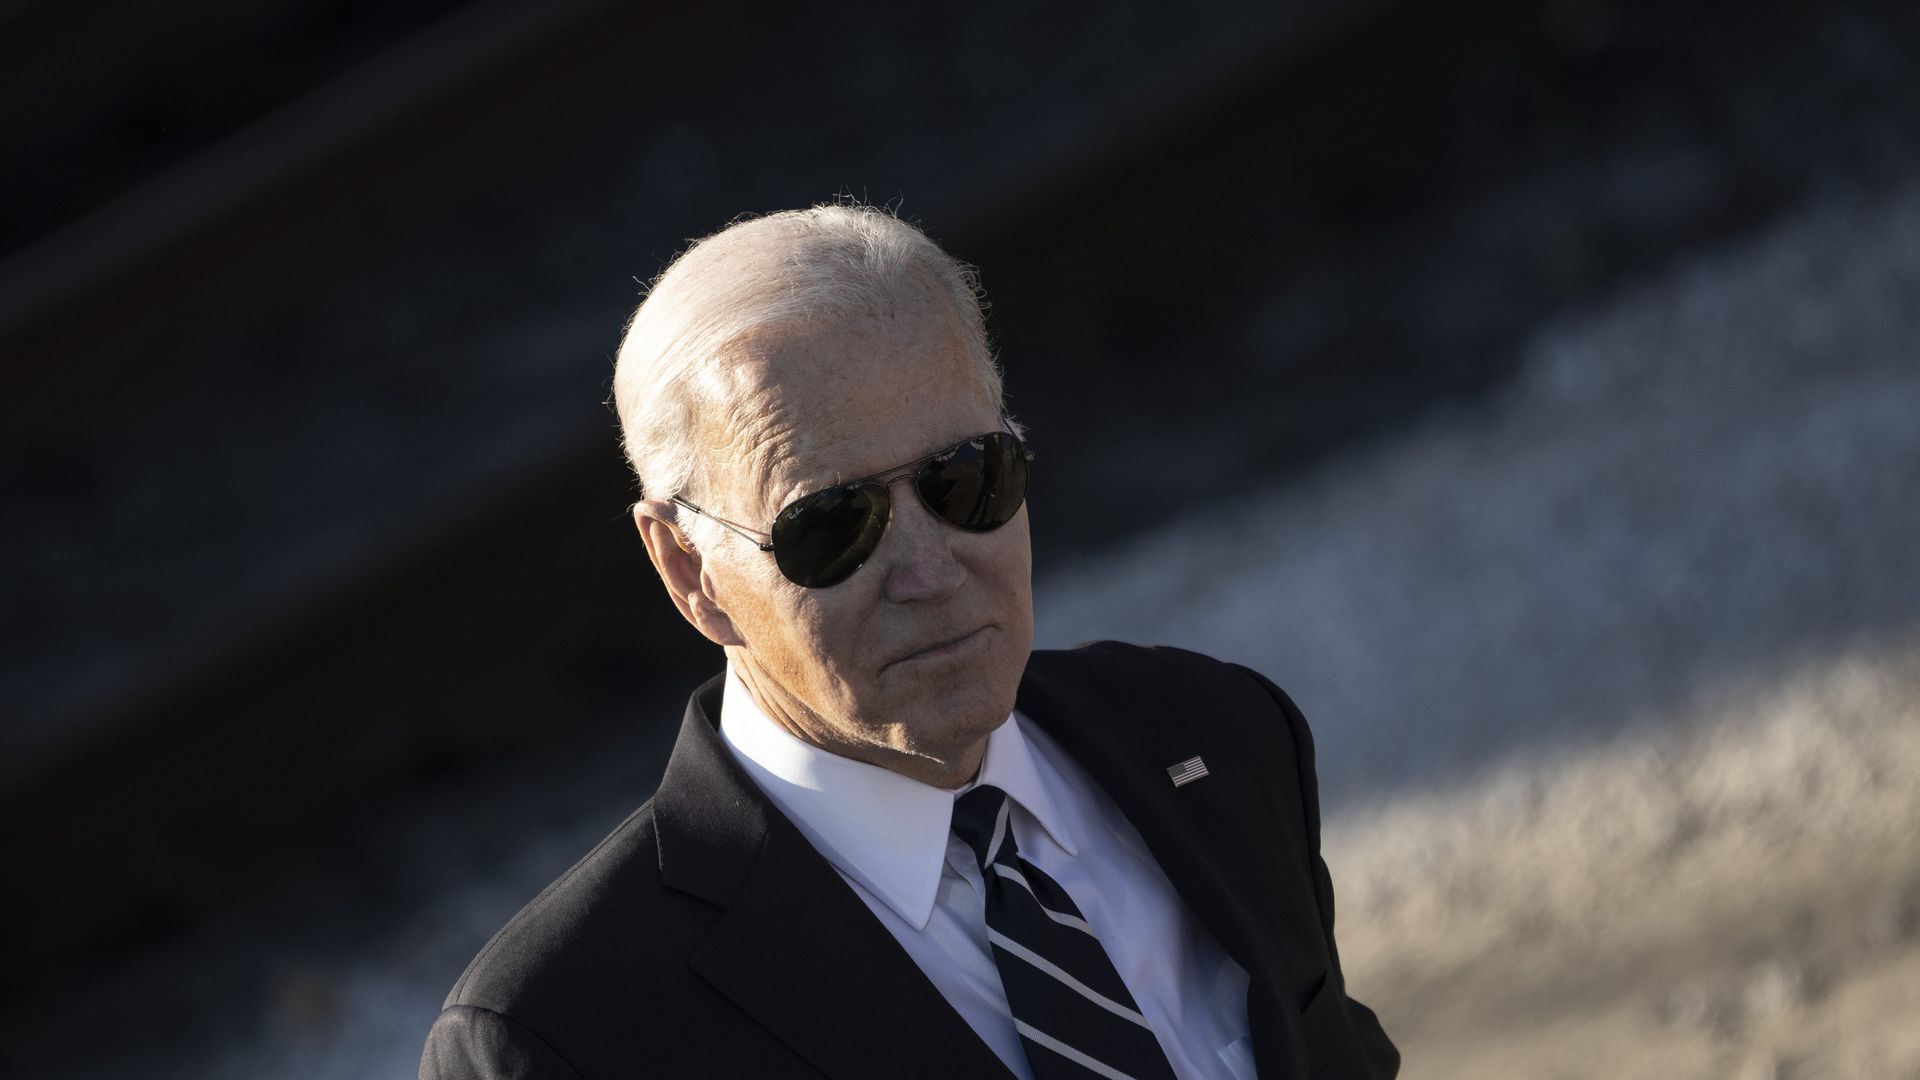 President Biden, wearing a gray suit, aviator sunglasses, white shirt and white and navy striped tie stands in front of train tracks.